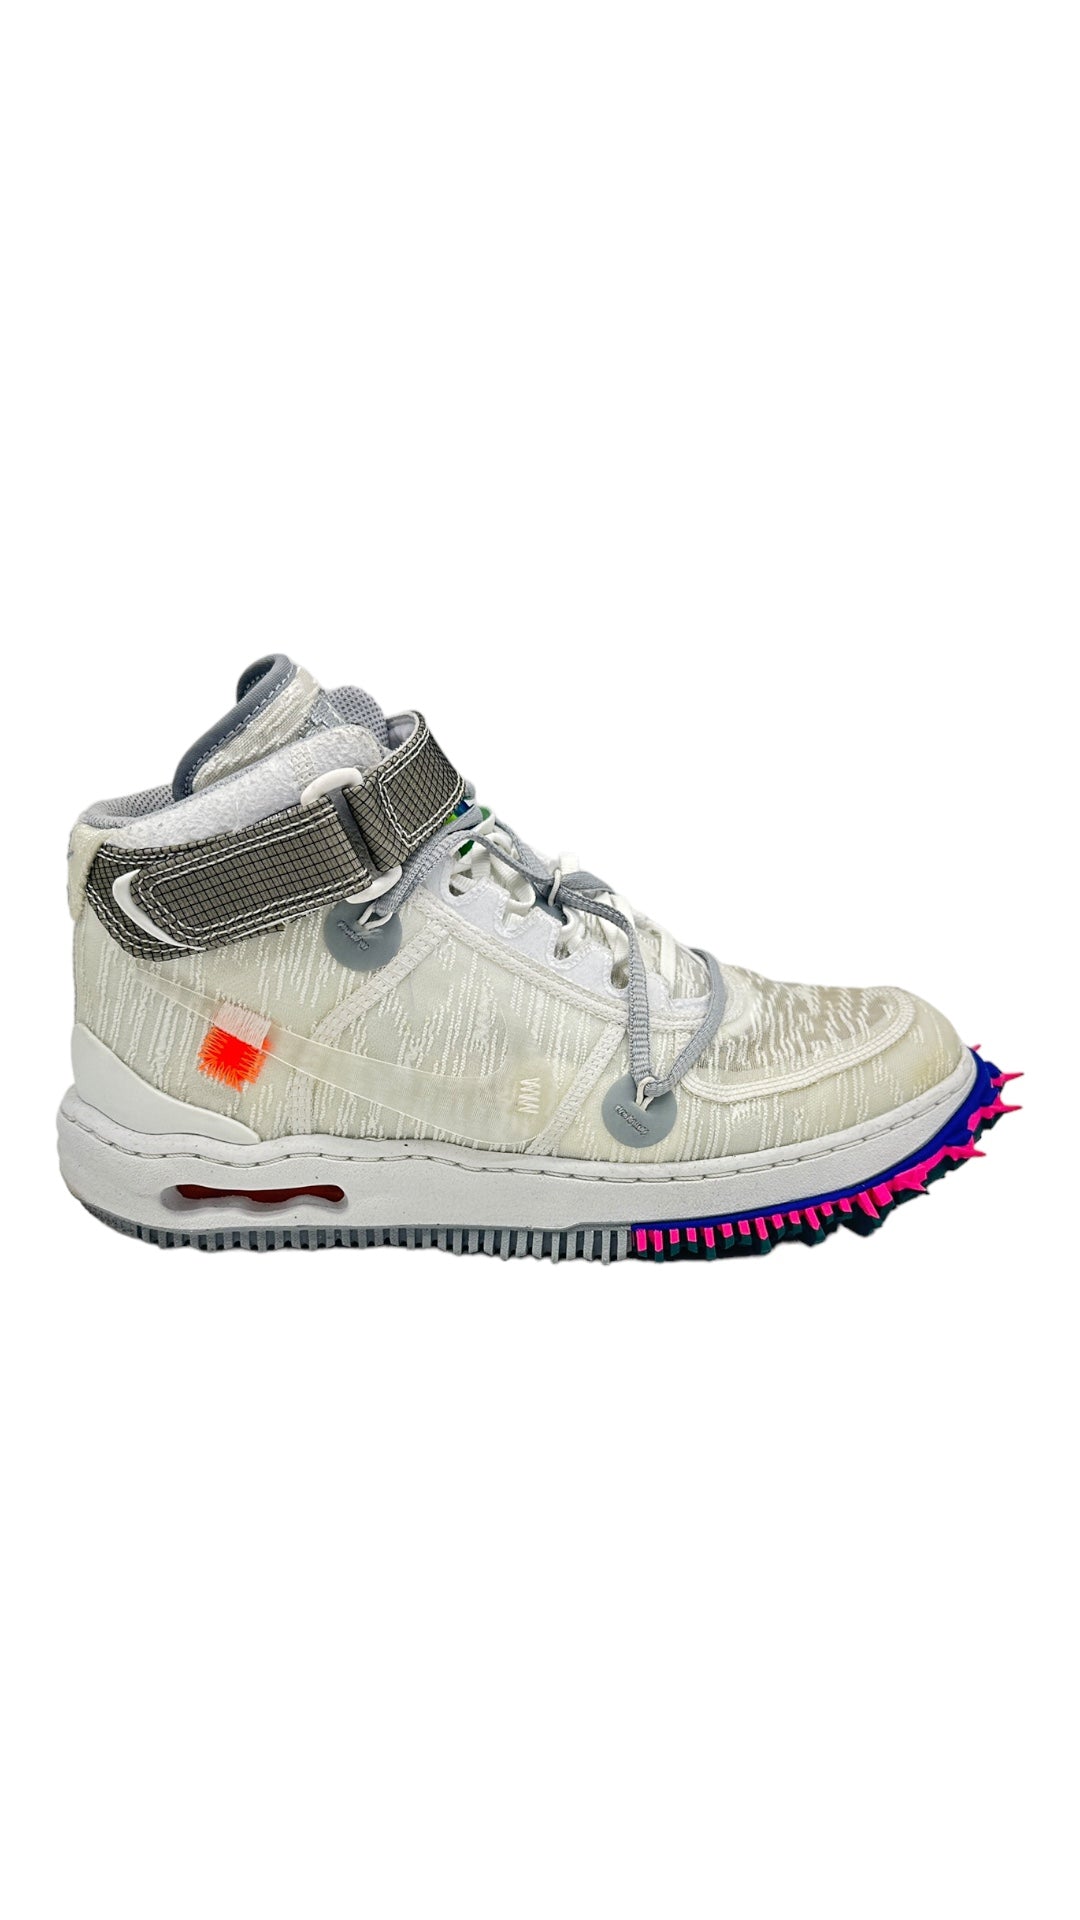 Preowned Off-White x Air Force 1 Mid 'White' Sz 8M/9.5W DO6290-100